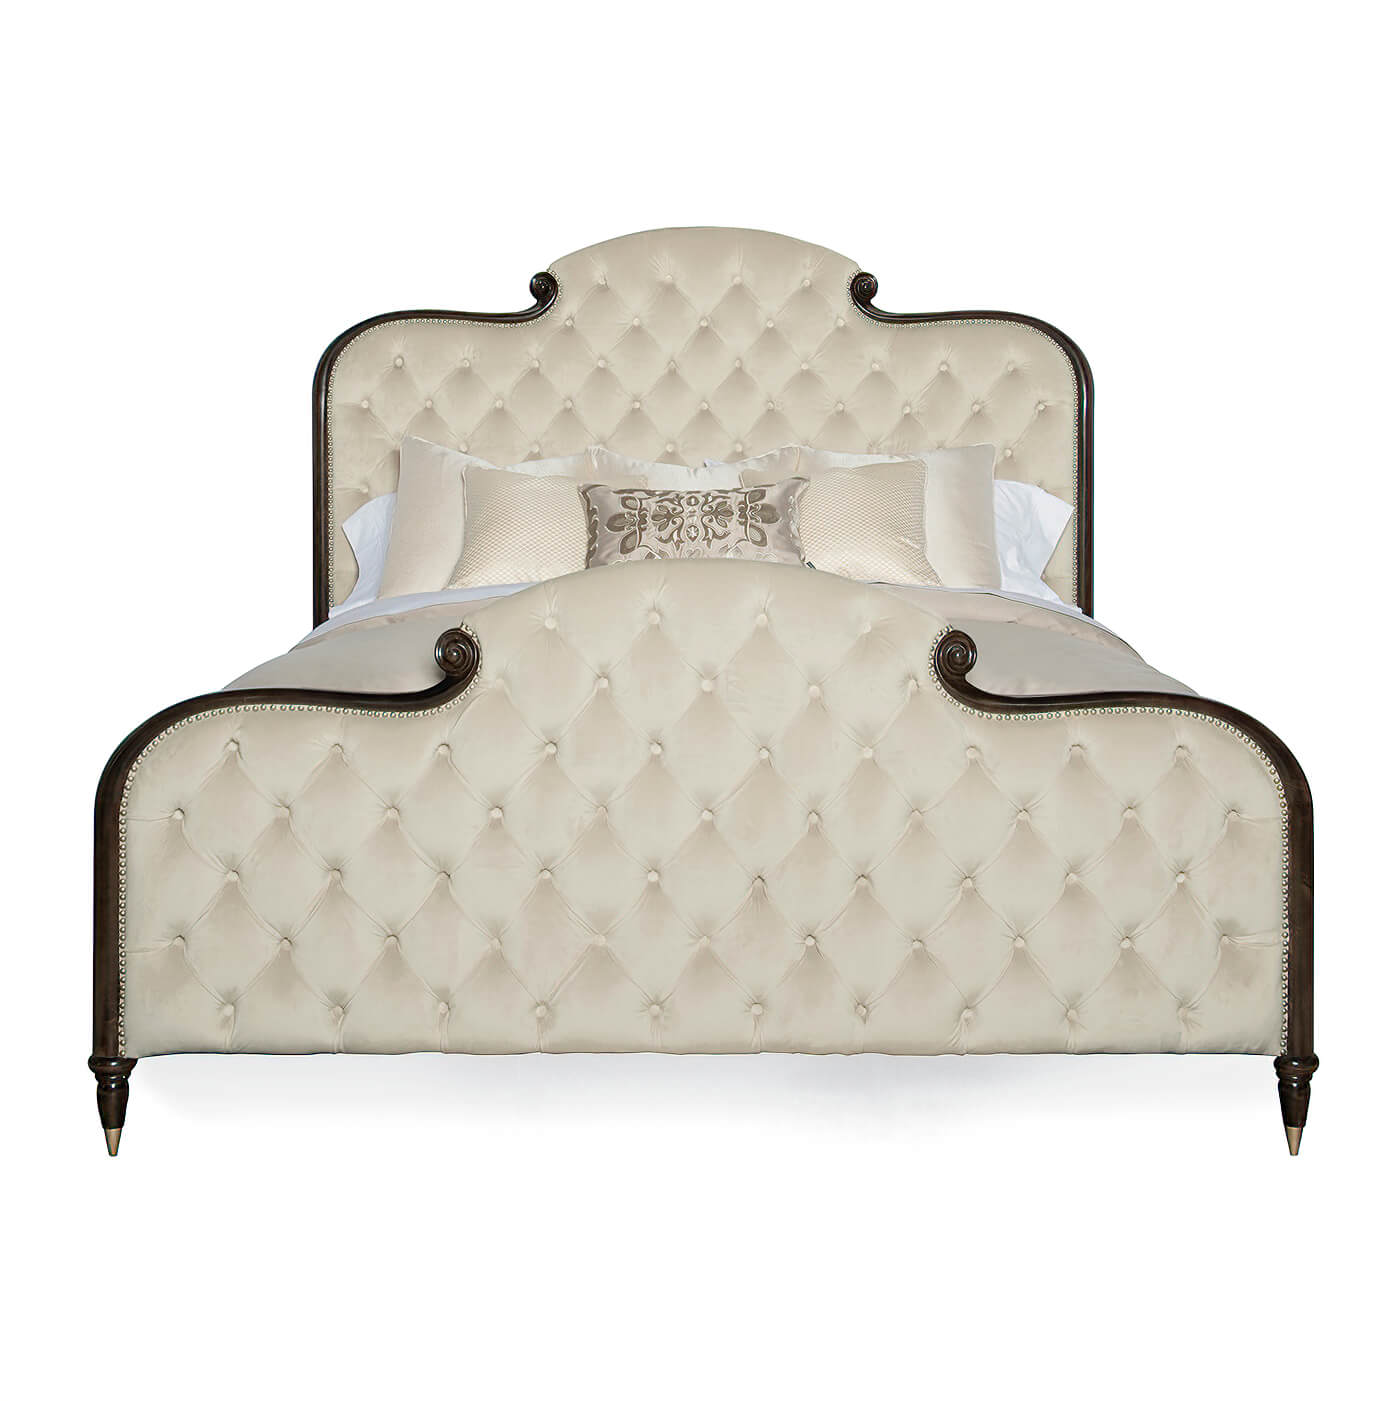 English Regency Tufted Queen Size Bed - English Georgian America